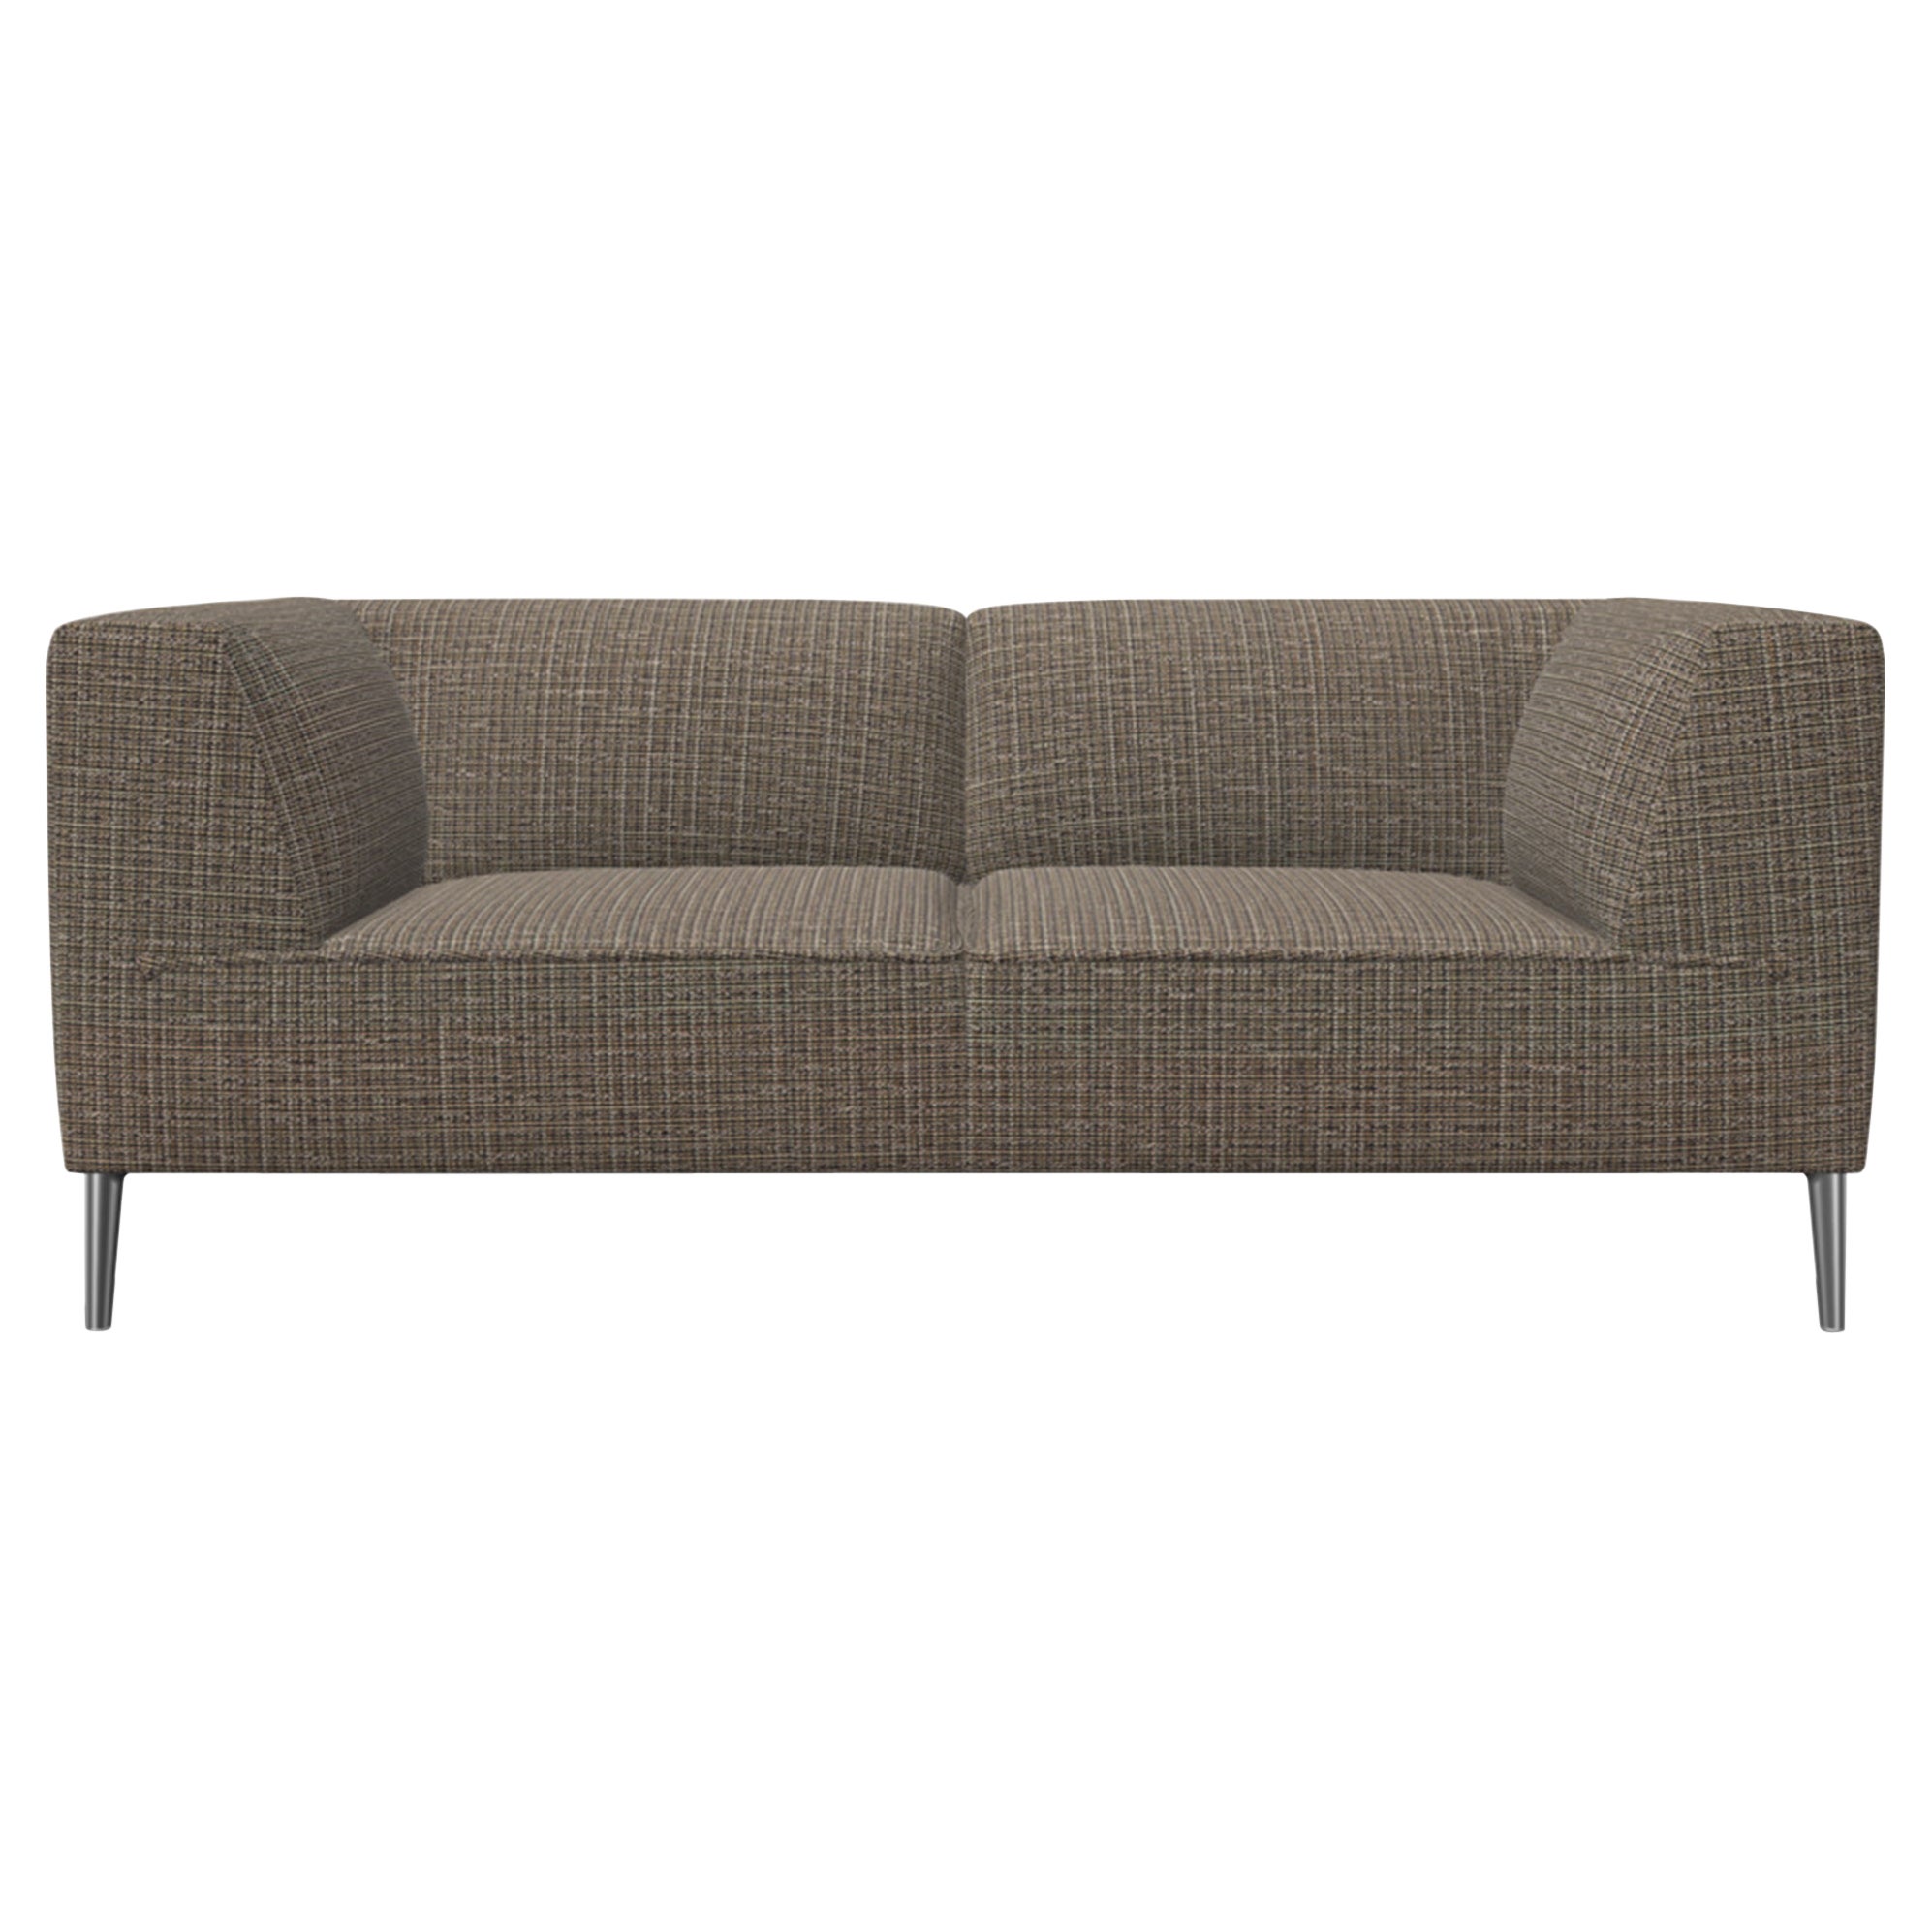 Moooi Double Seat Sofa So Good in Brown Upholstery with Polished Aluminum Feet